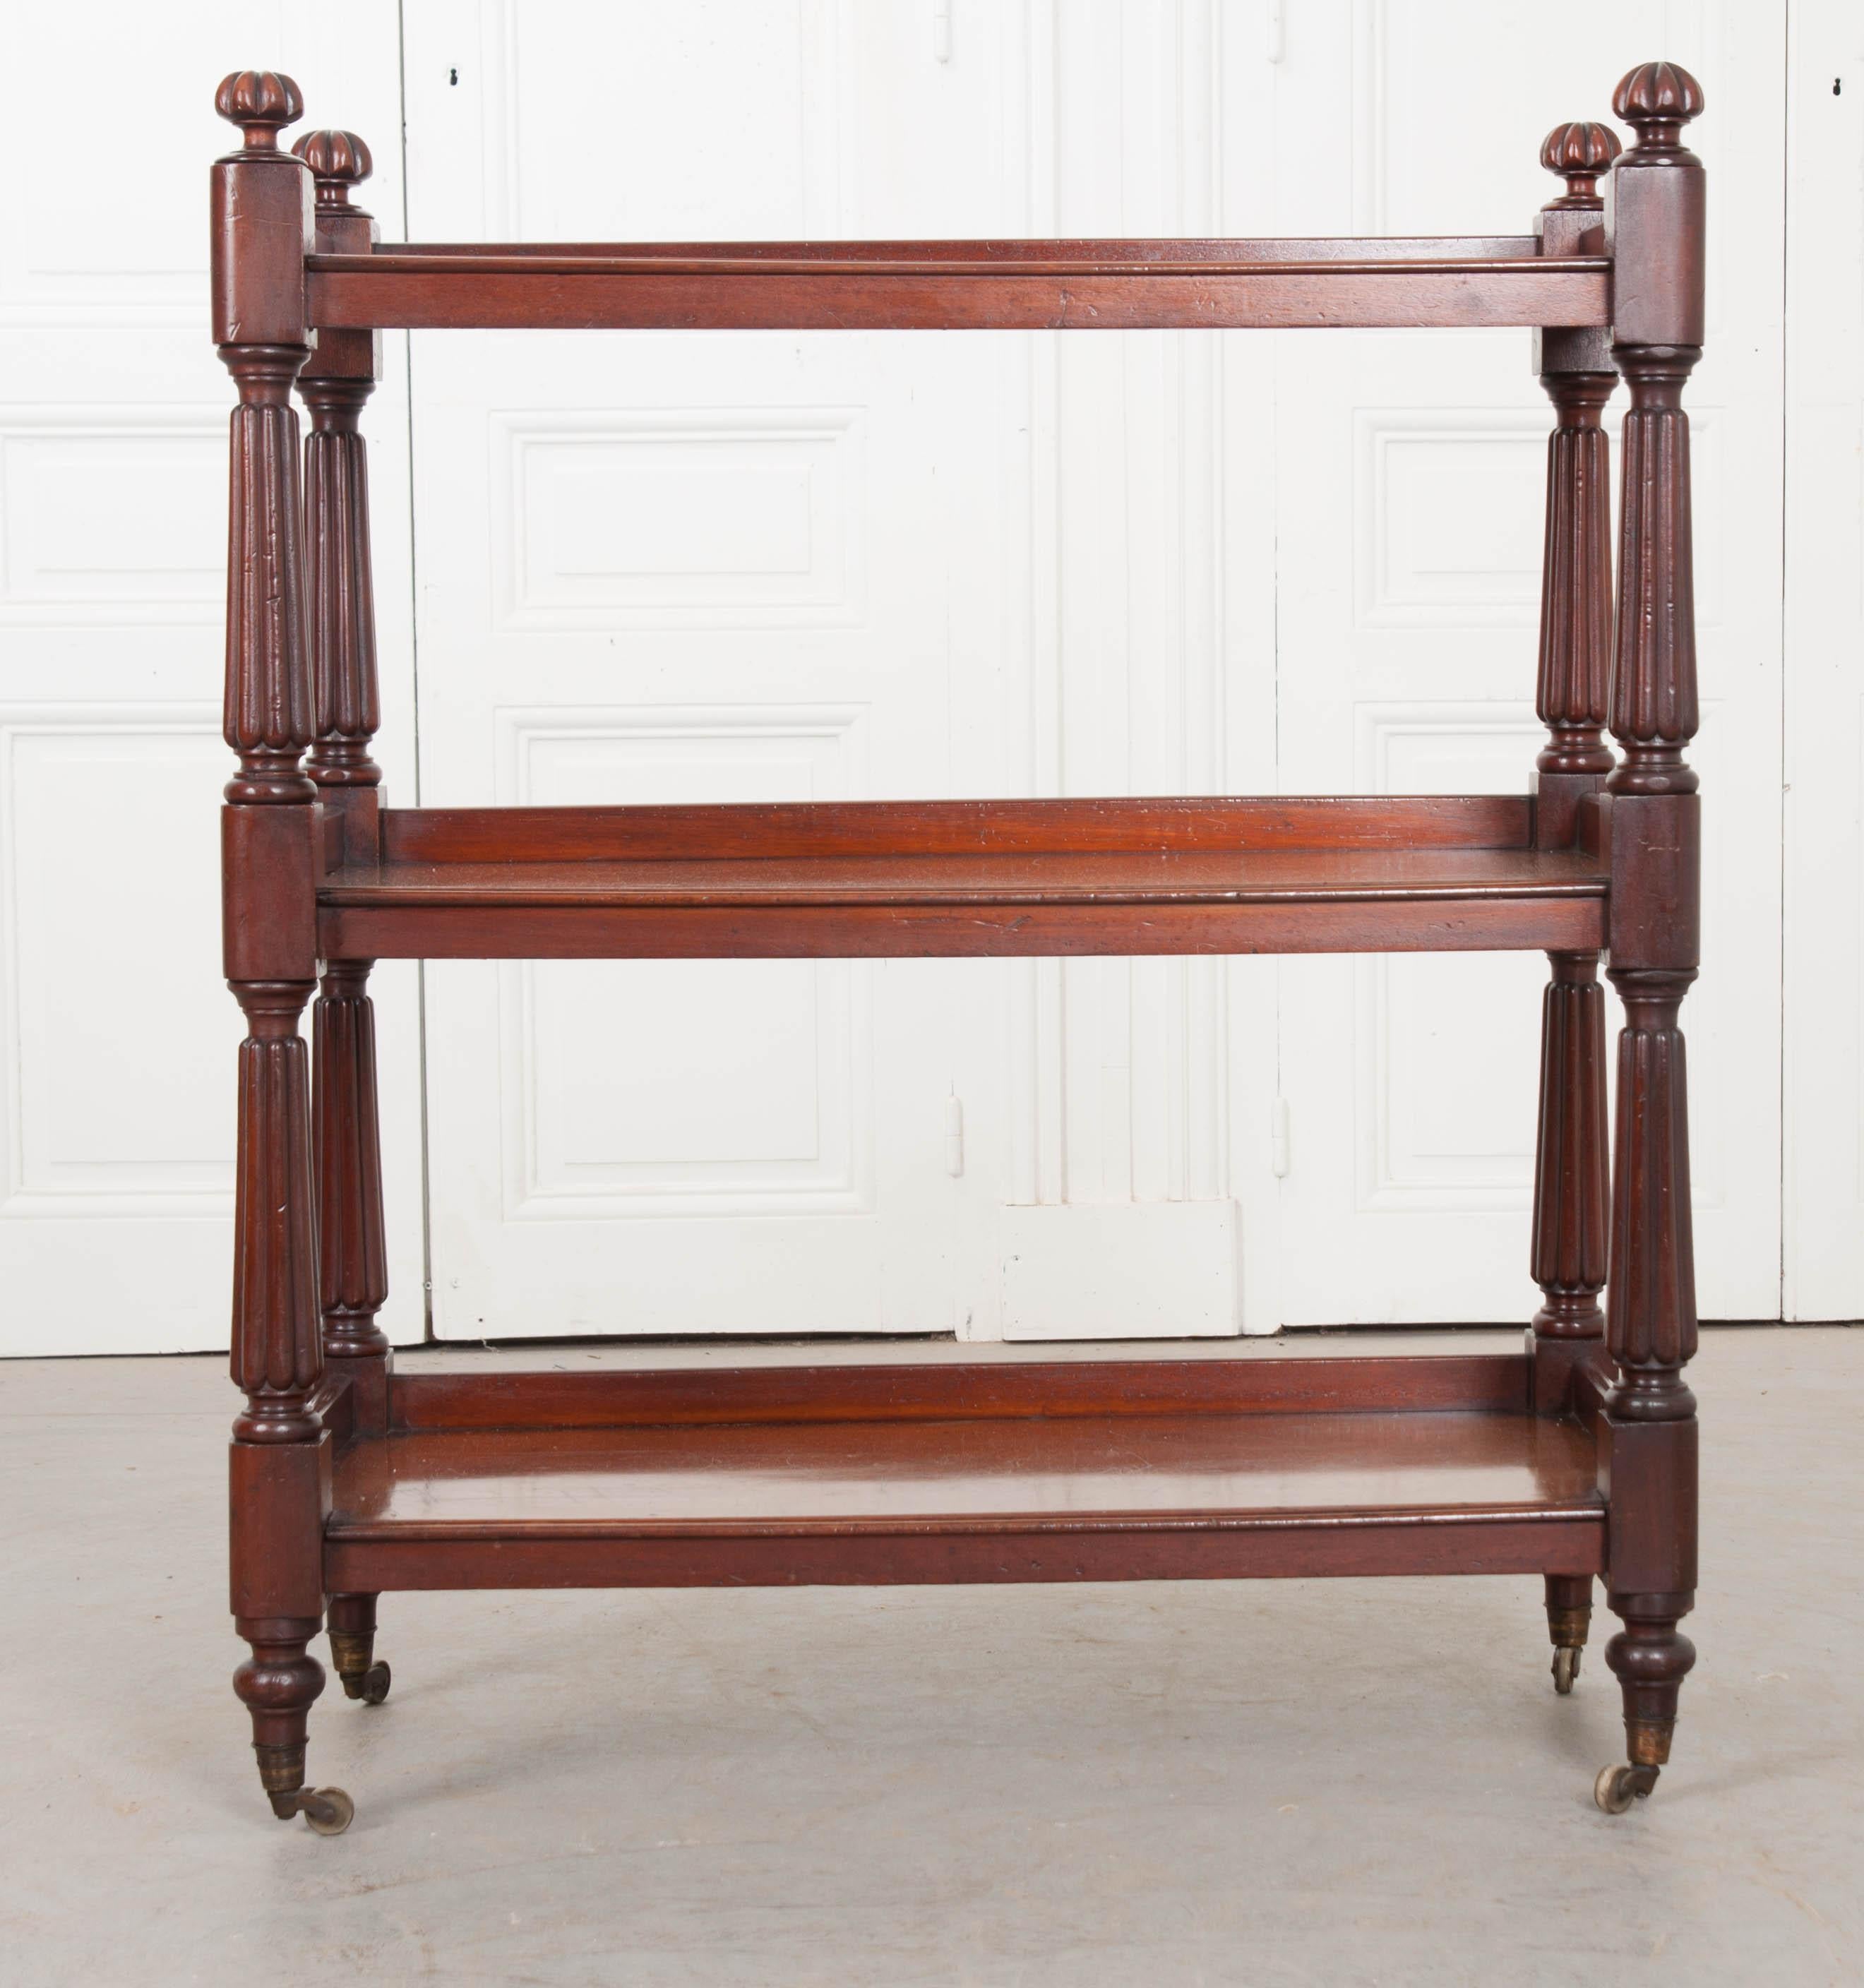 A gorgeous, beautifully carved mahogany tea trolley for serving food, drinks or displaying your collectibles. We love this antique’s versatility! This trolley retains its beautiful, rich, original color and patina and has a fresh French polish,